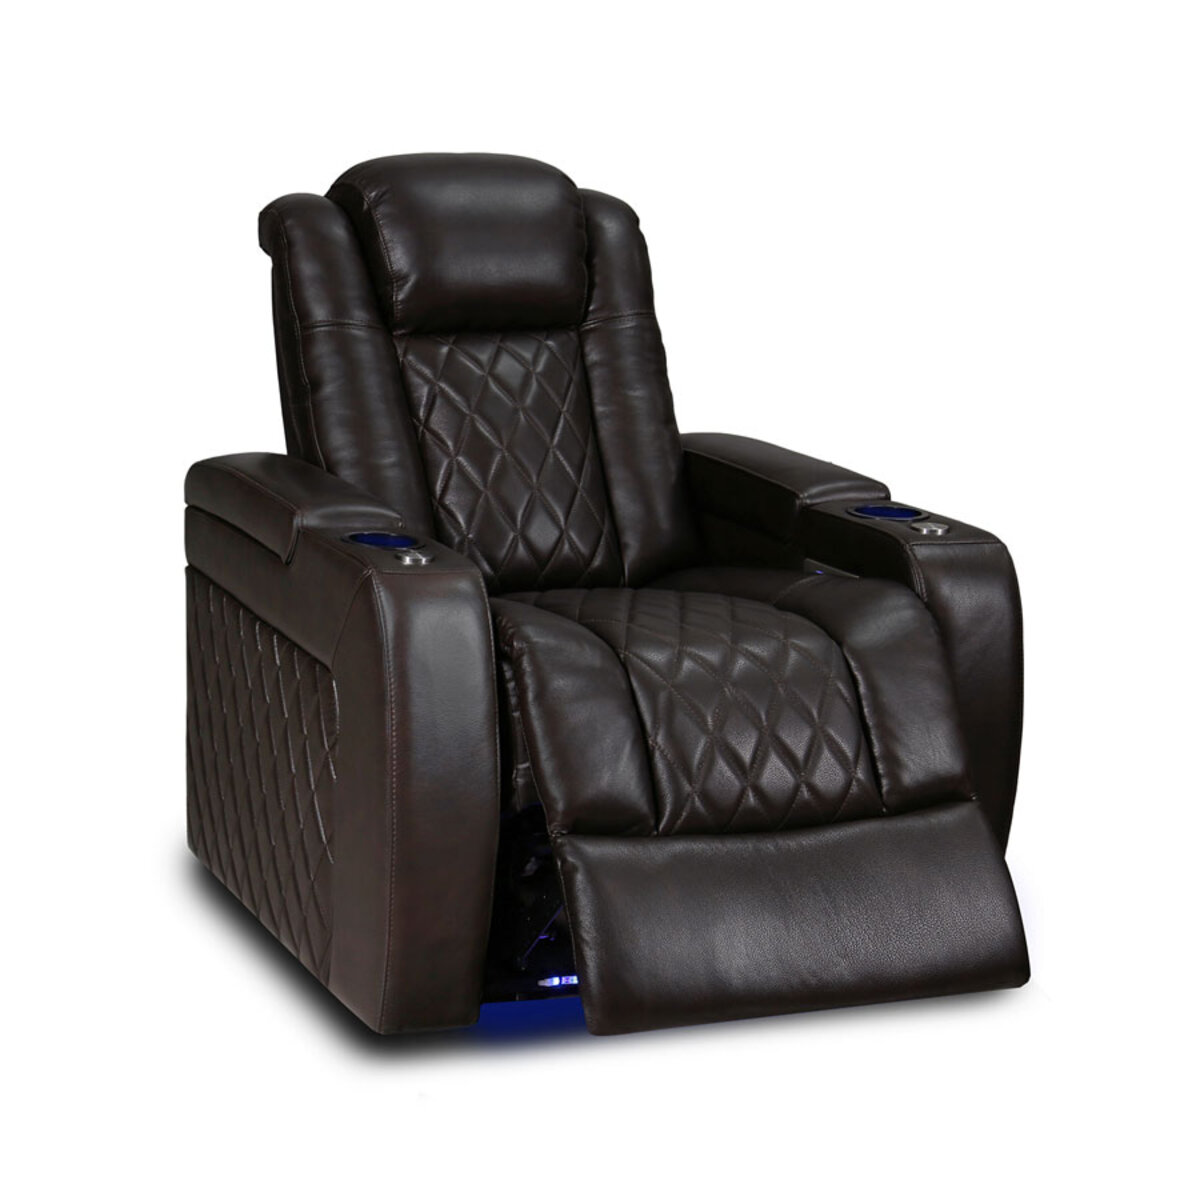 Valencia Home Theatre Seating Tuscany Single Chair, Brown